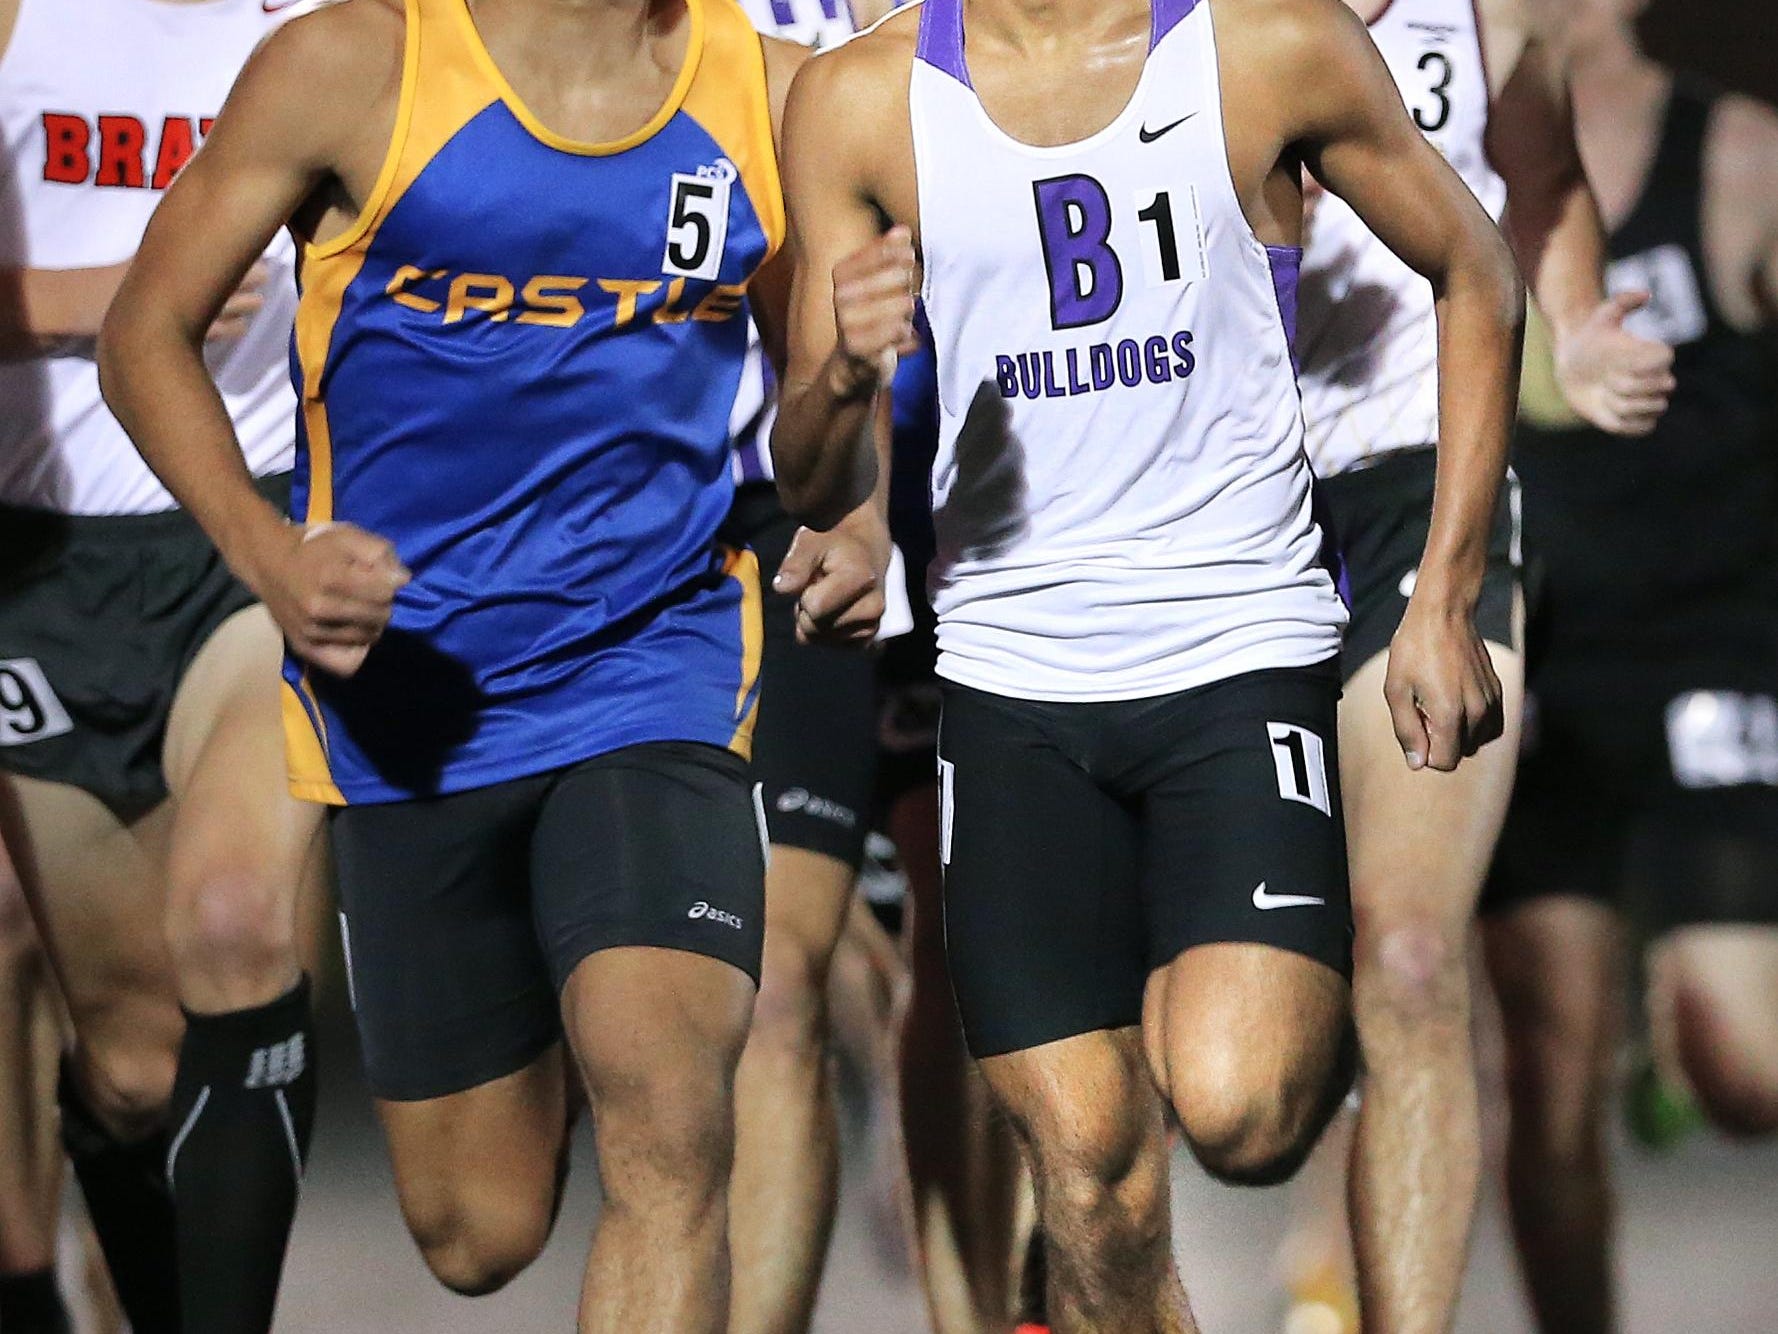 Brownsburg's Hari Sathyamurthy, right, won the Boys Miracle Mile Heat 3 race during the 2015 Flashes Showcase Invitational at Franklin Central High School on April 17, 2015.